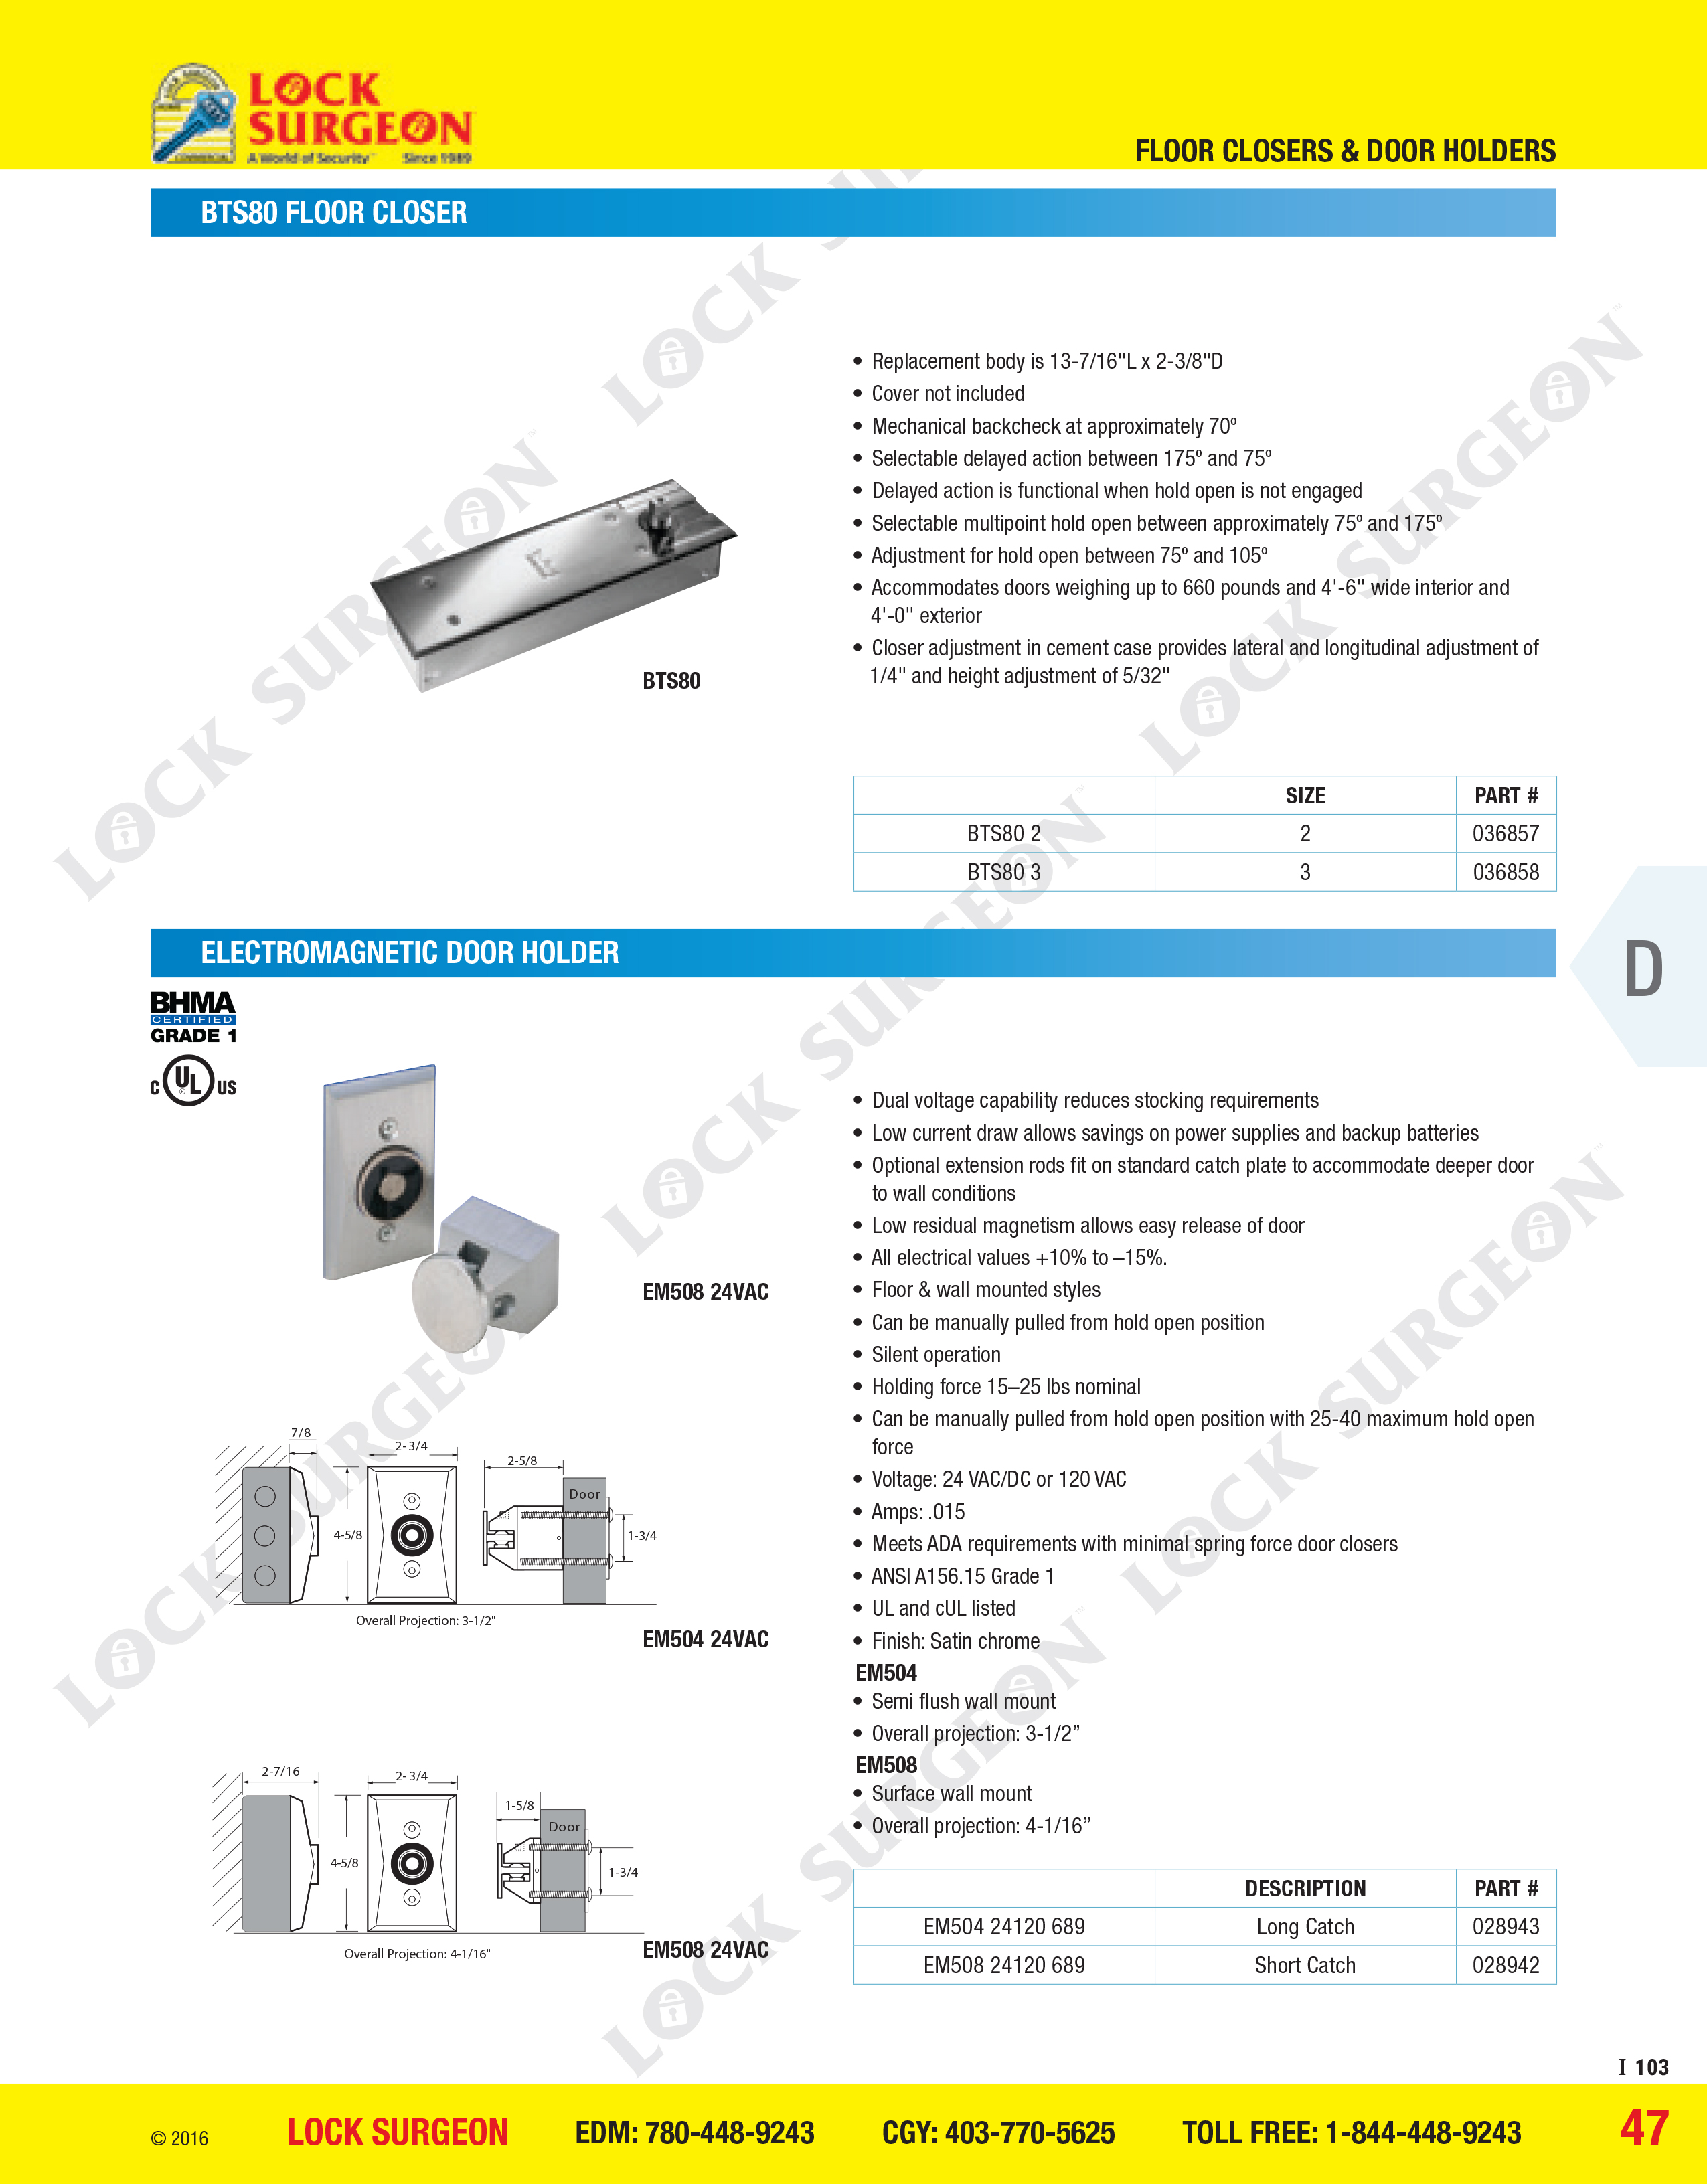 BTS80 Floor closer and Electromagnetic door holder with mechanical back-check at 70-inches Acheson